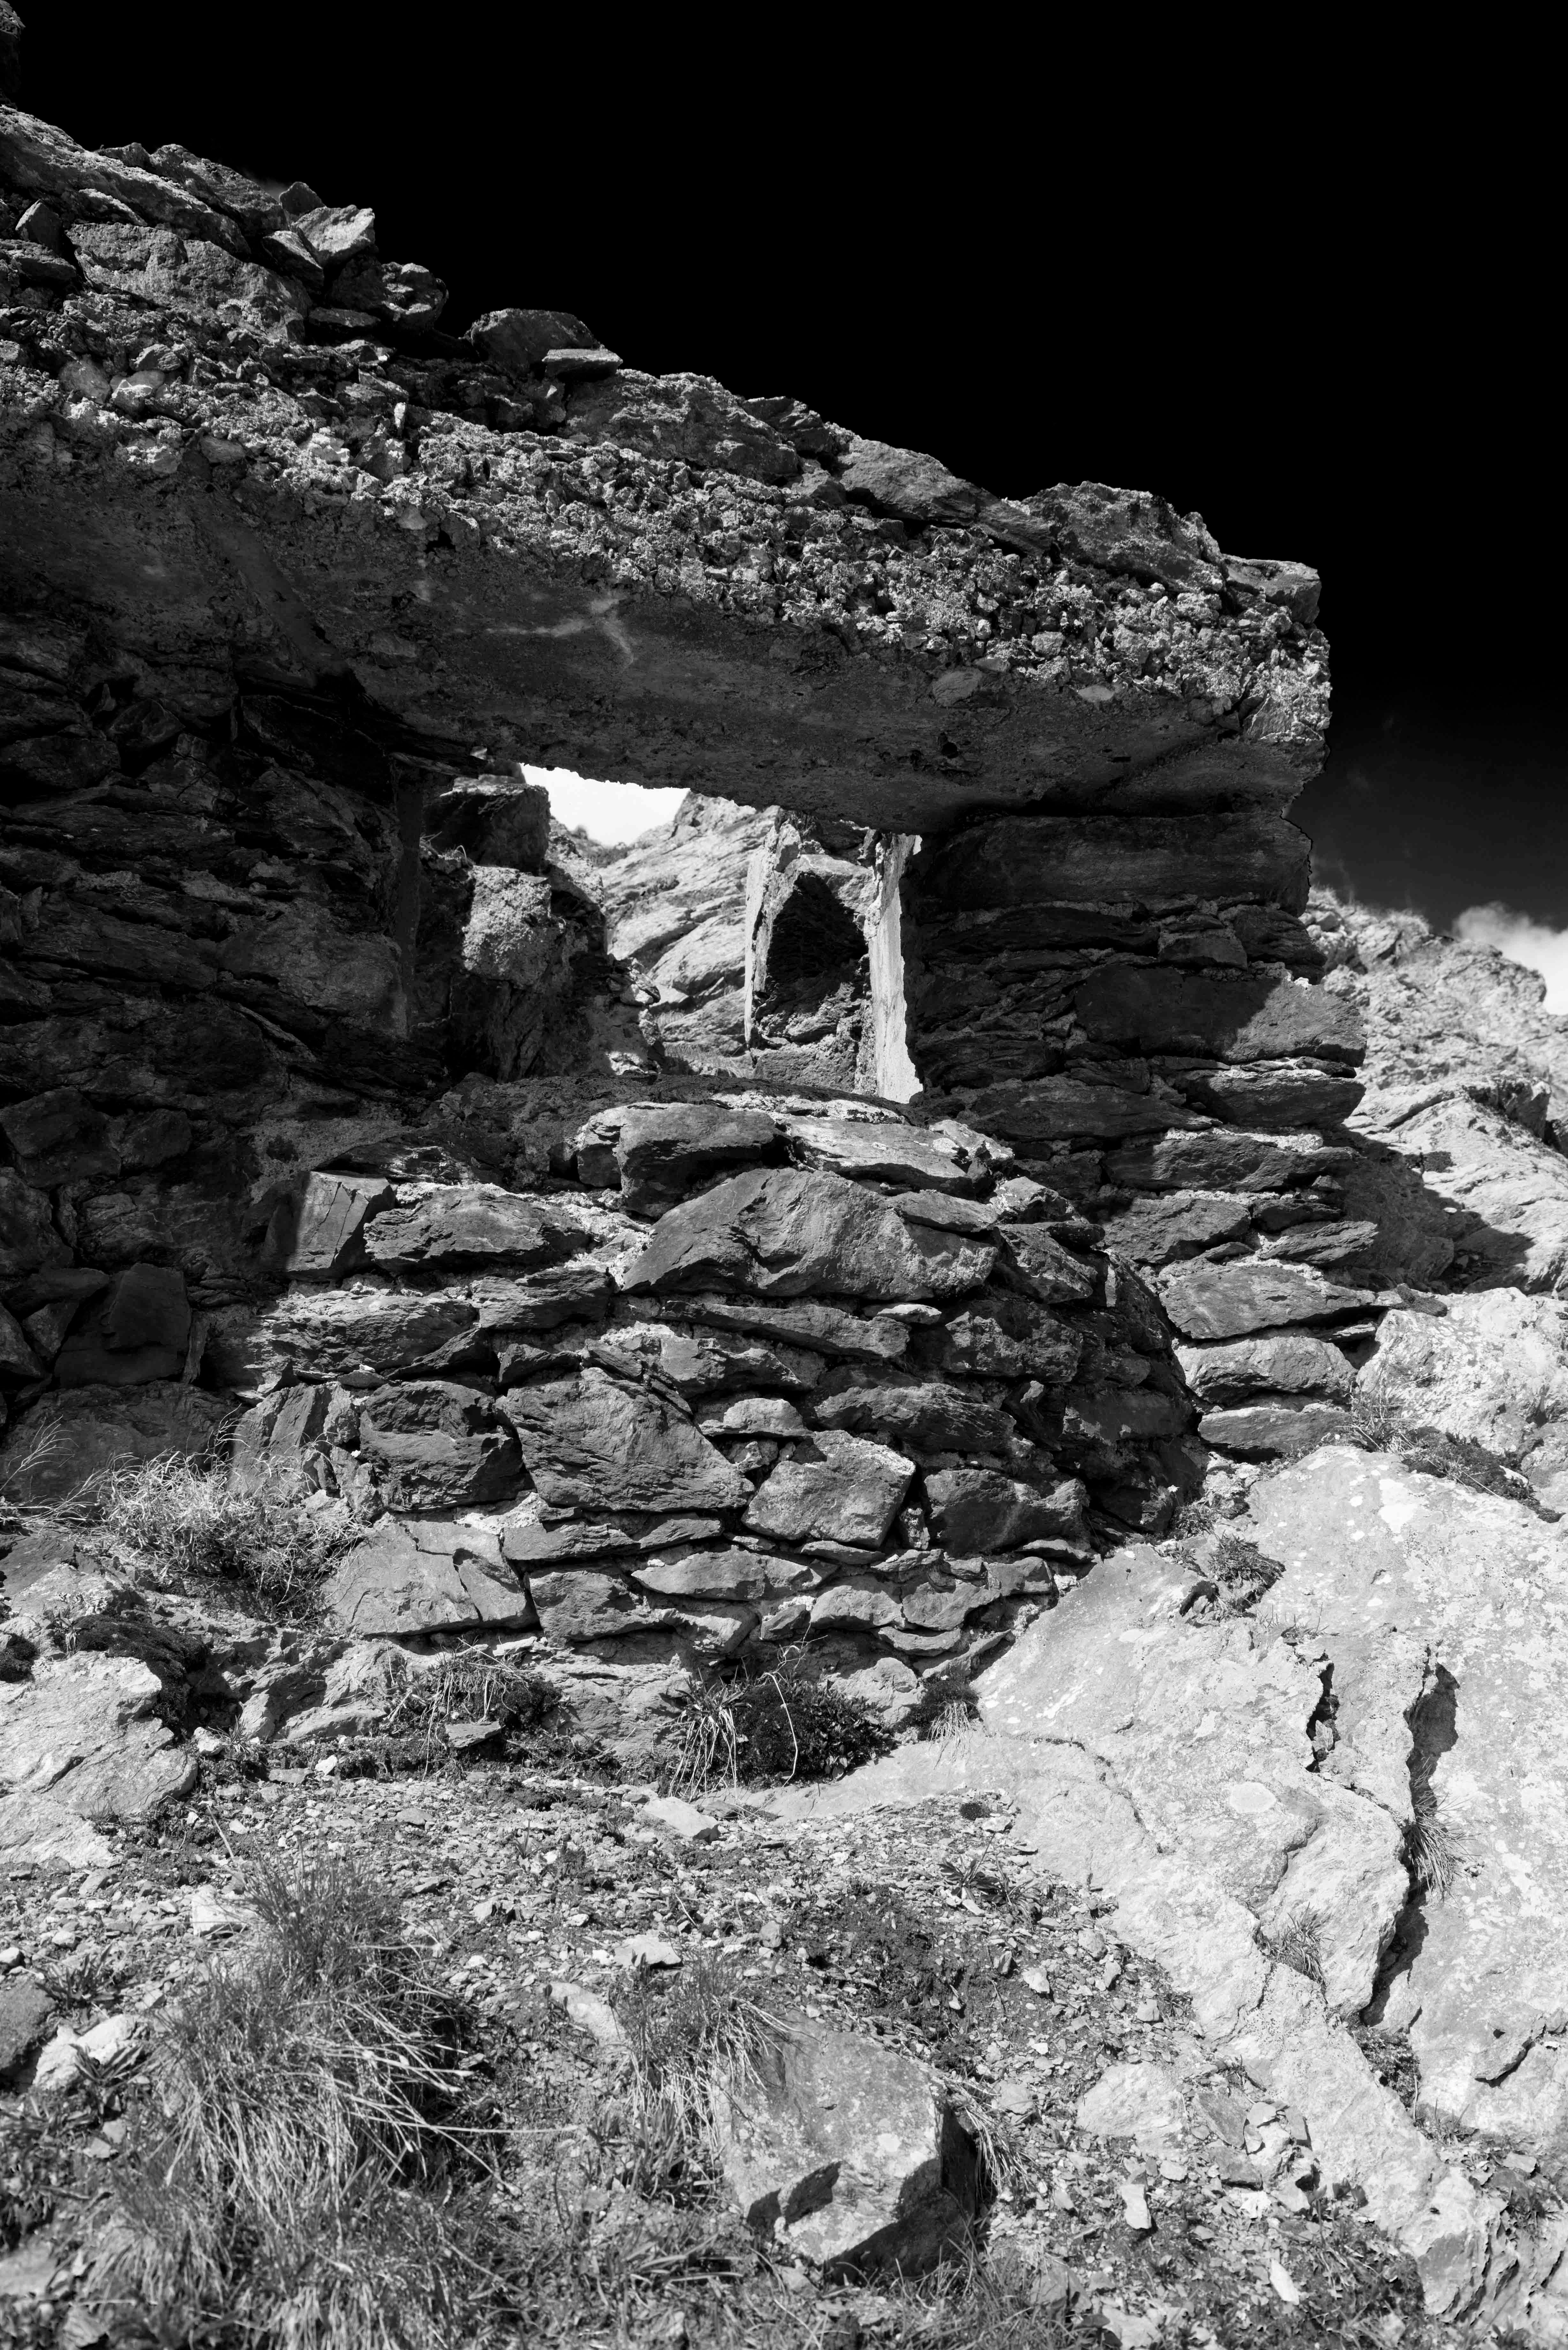 A Fatal Pass, trenches in the Italian Alps, Diptych. Landscape B&W photograph - Black Landscape Photograph by Luca Artioli